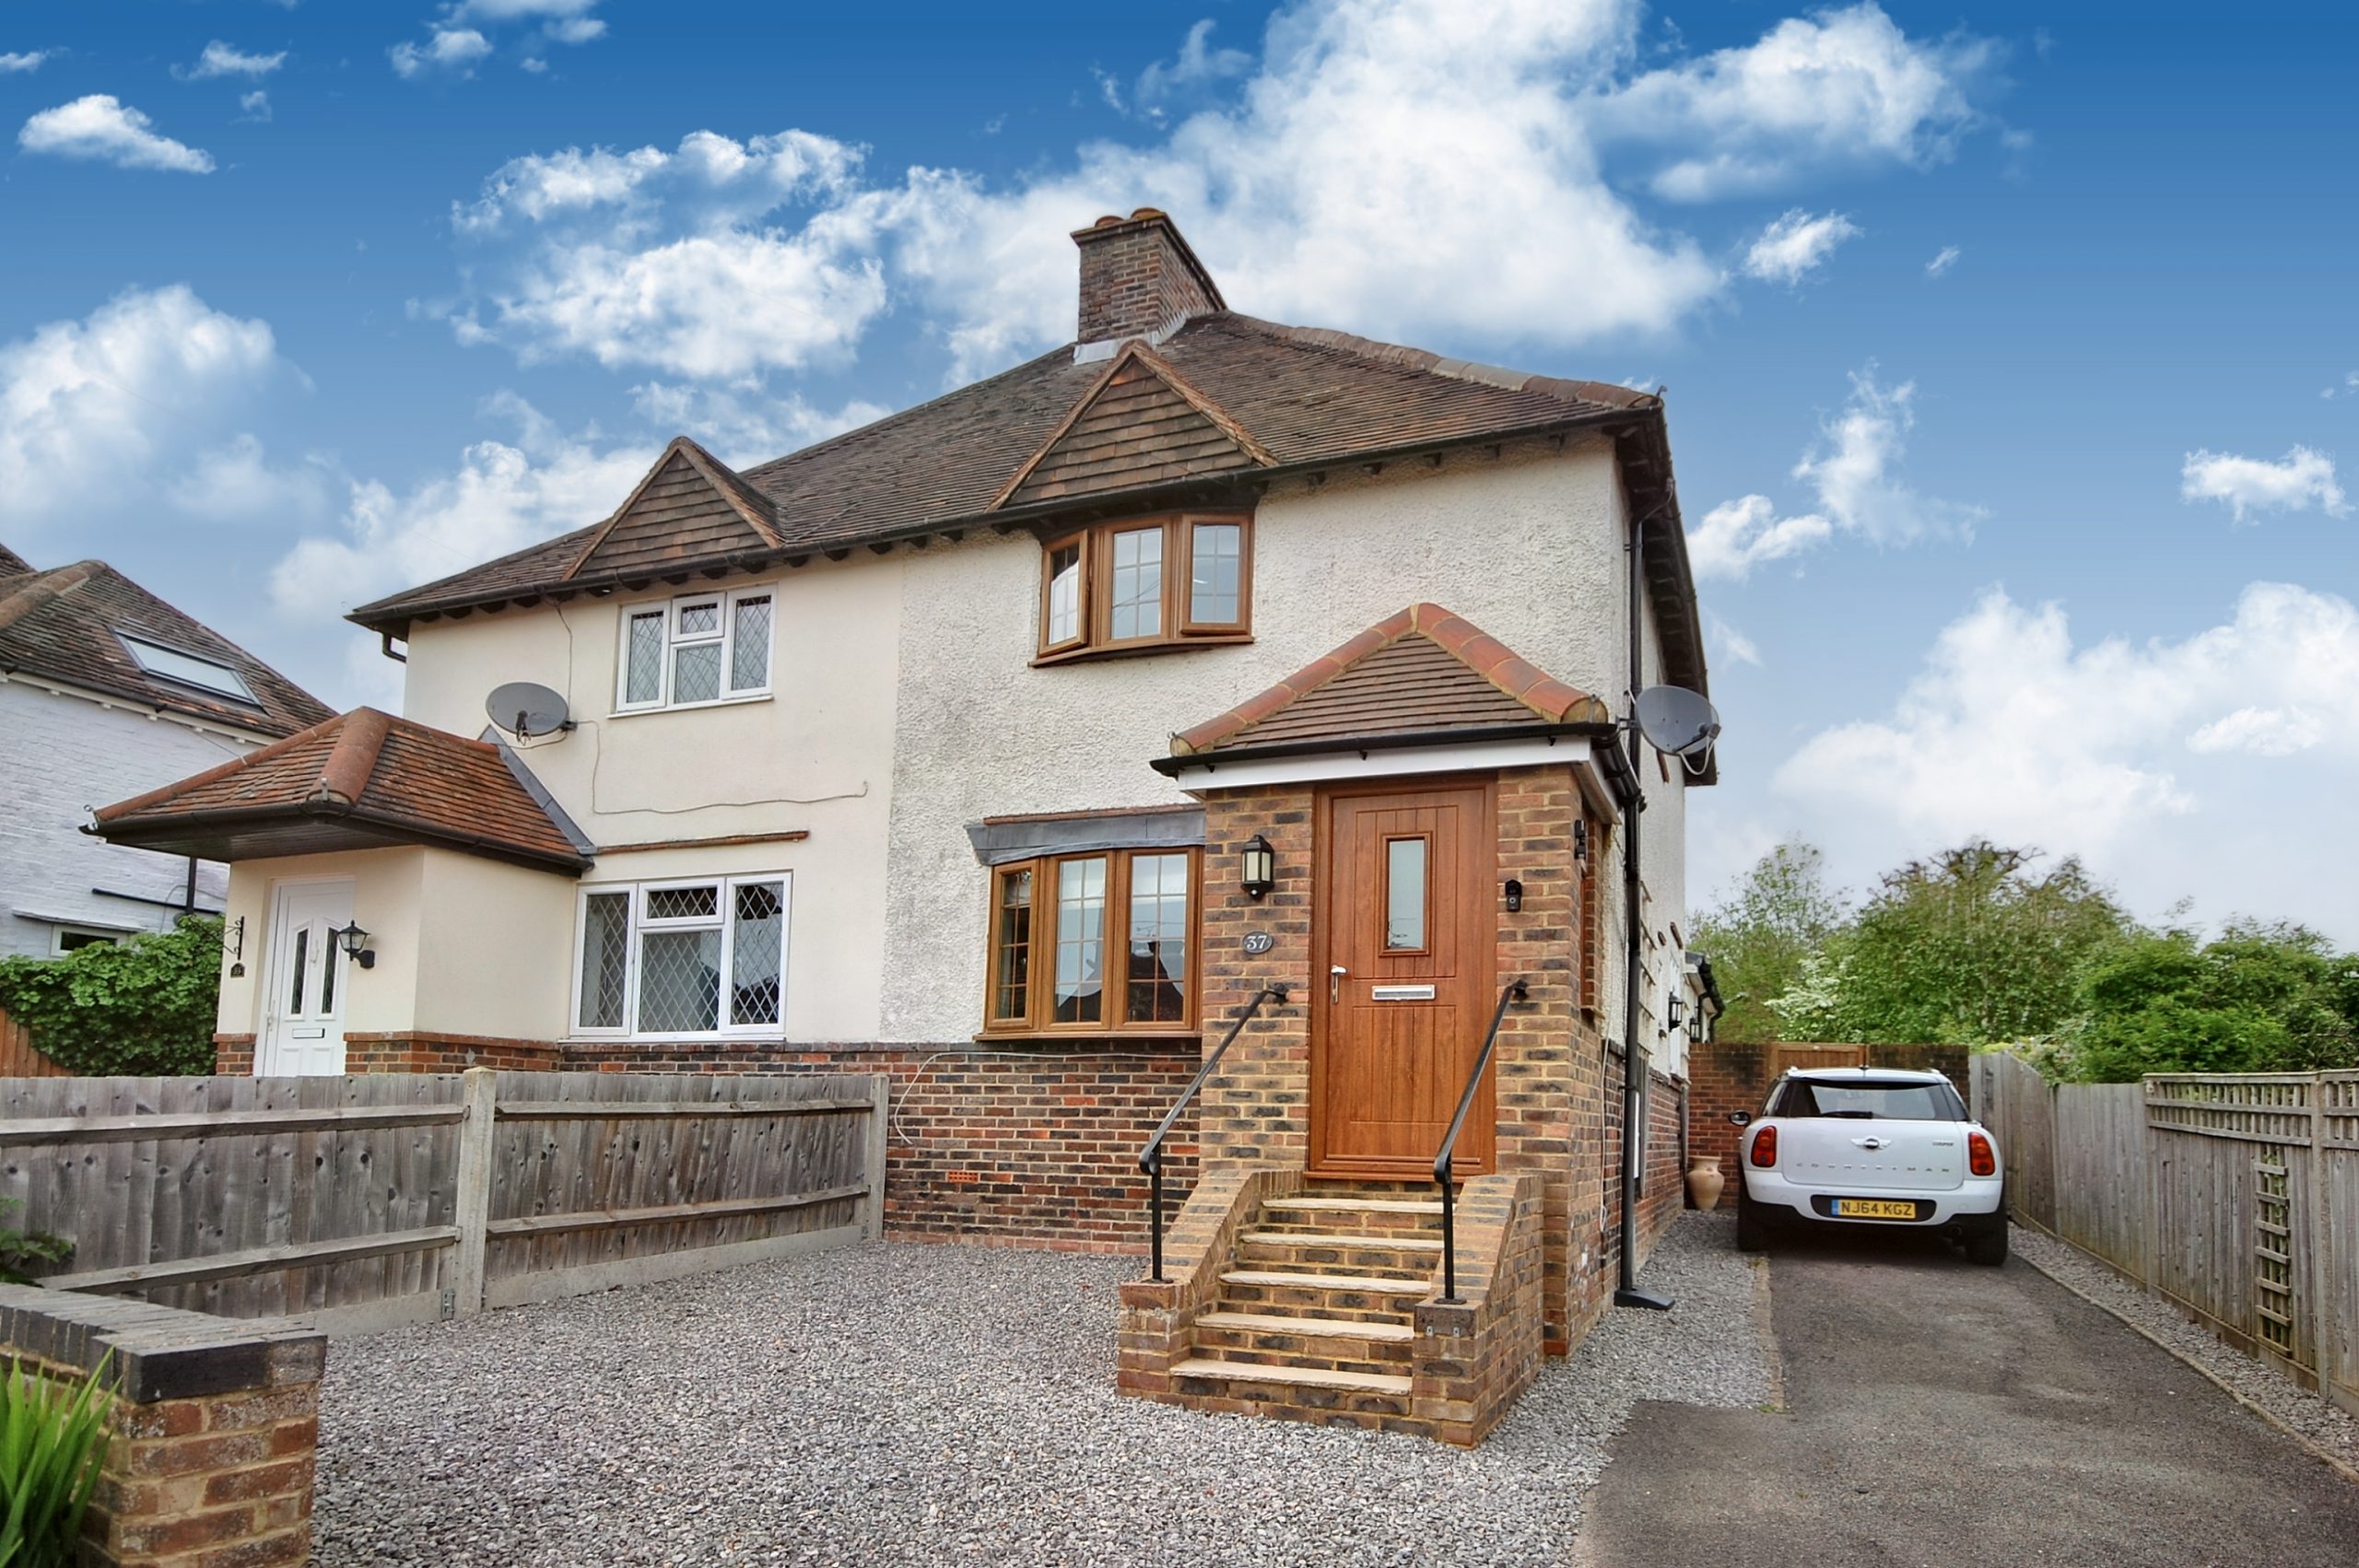 Another sale agreed in North Farnham from the weekend!